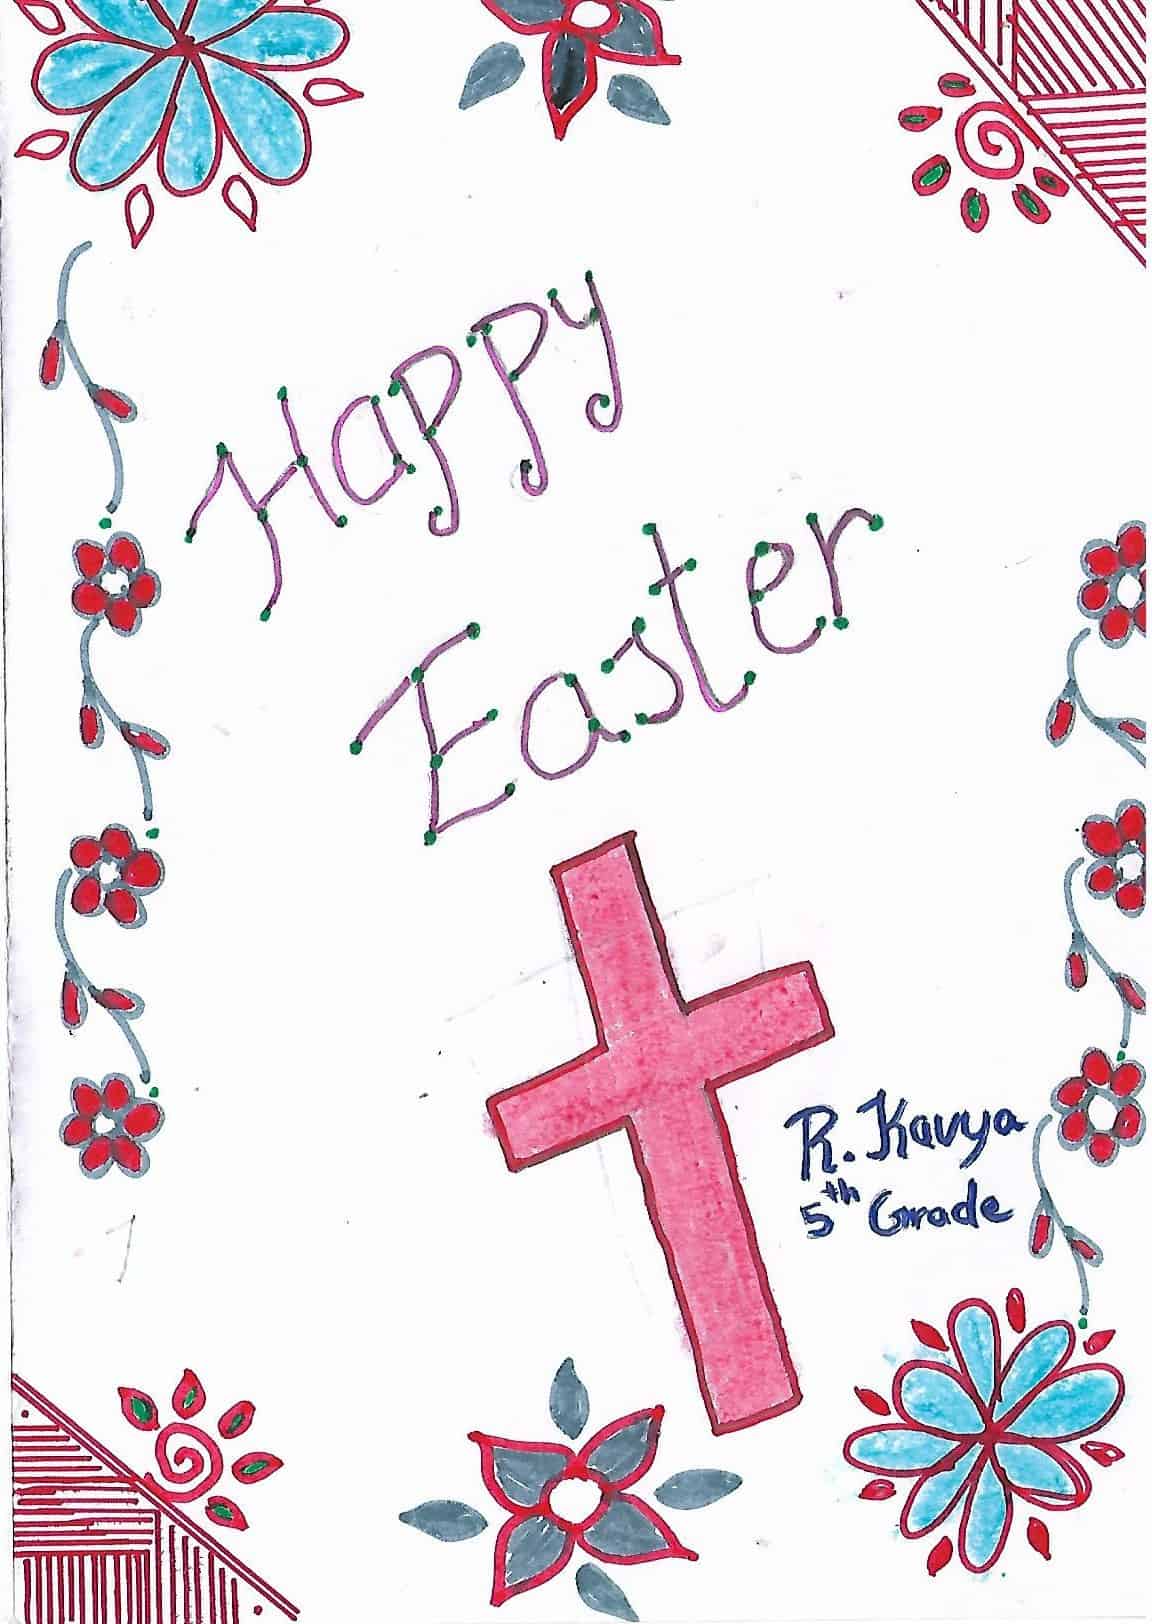 Easter greeting drawing by a child in a children's Home in India